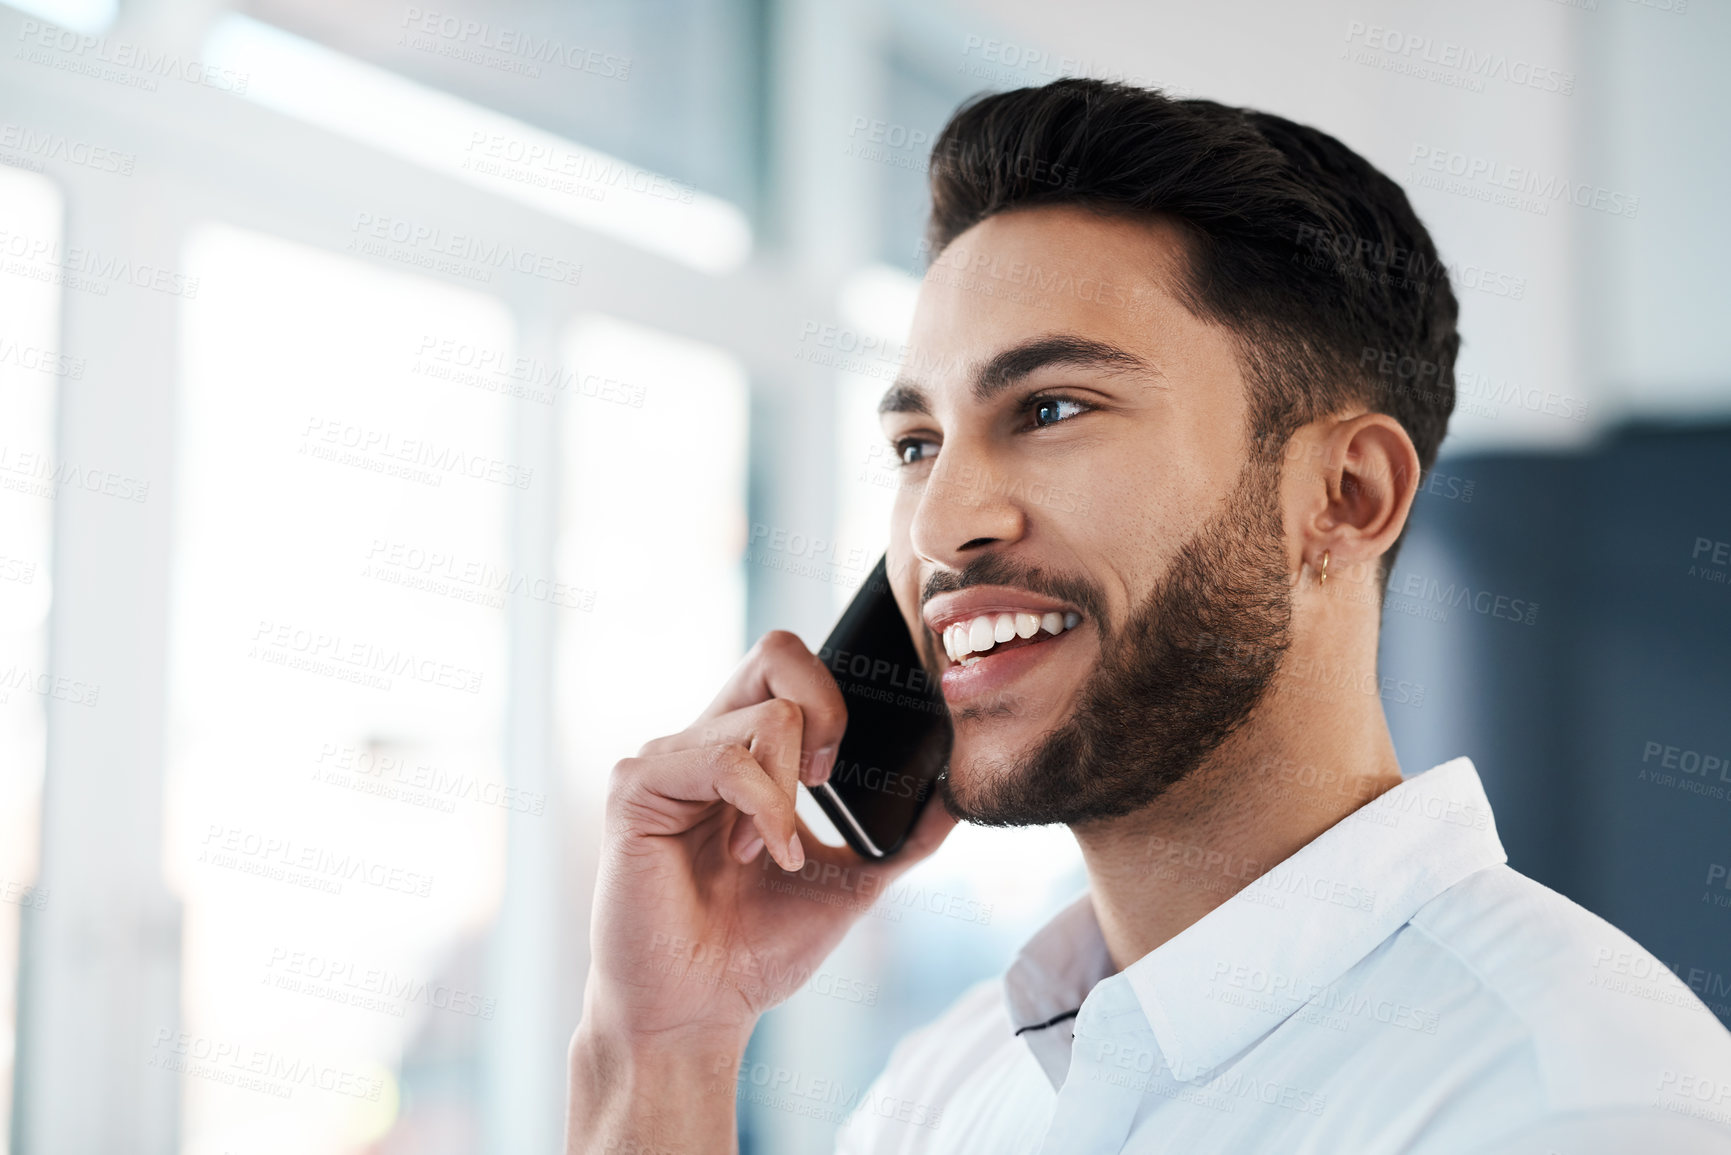 Buy stock photo Cropped shot of a handsome young businessman standing in his office and talking on his cellphone